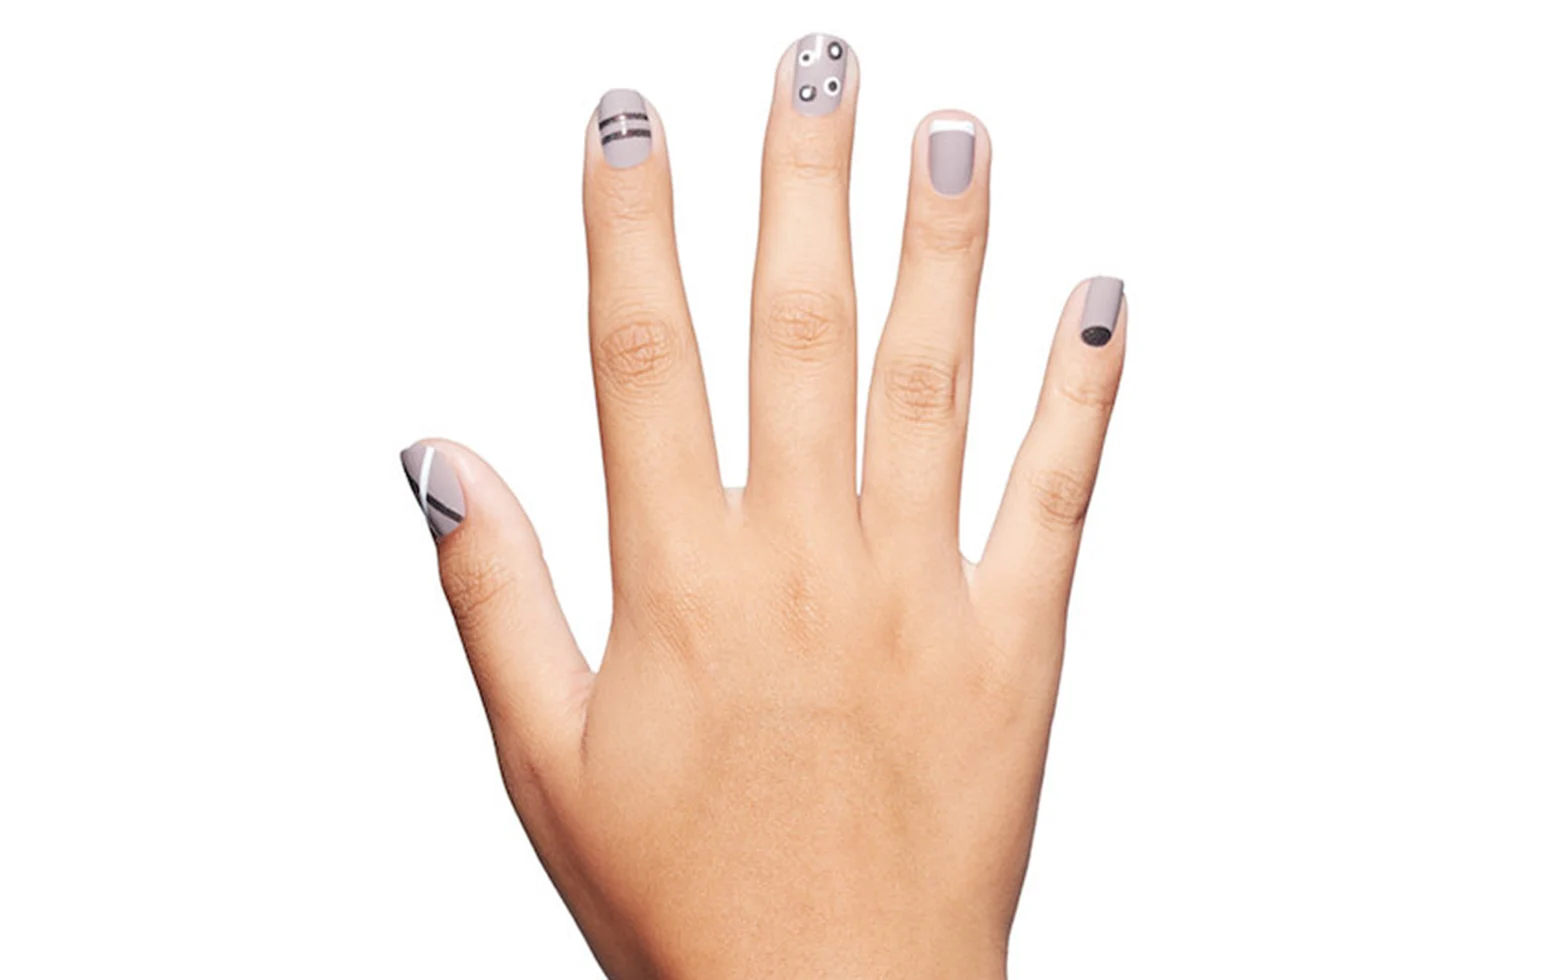 5 Simple Nail Art Designs for Beginners